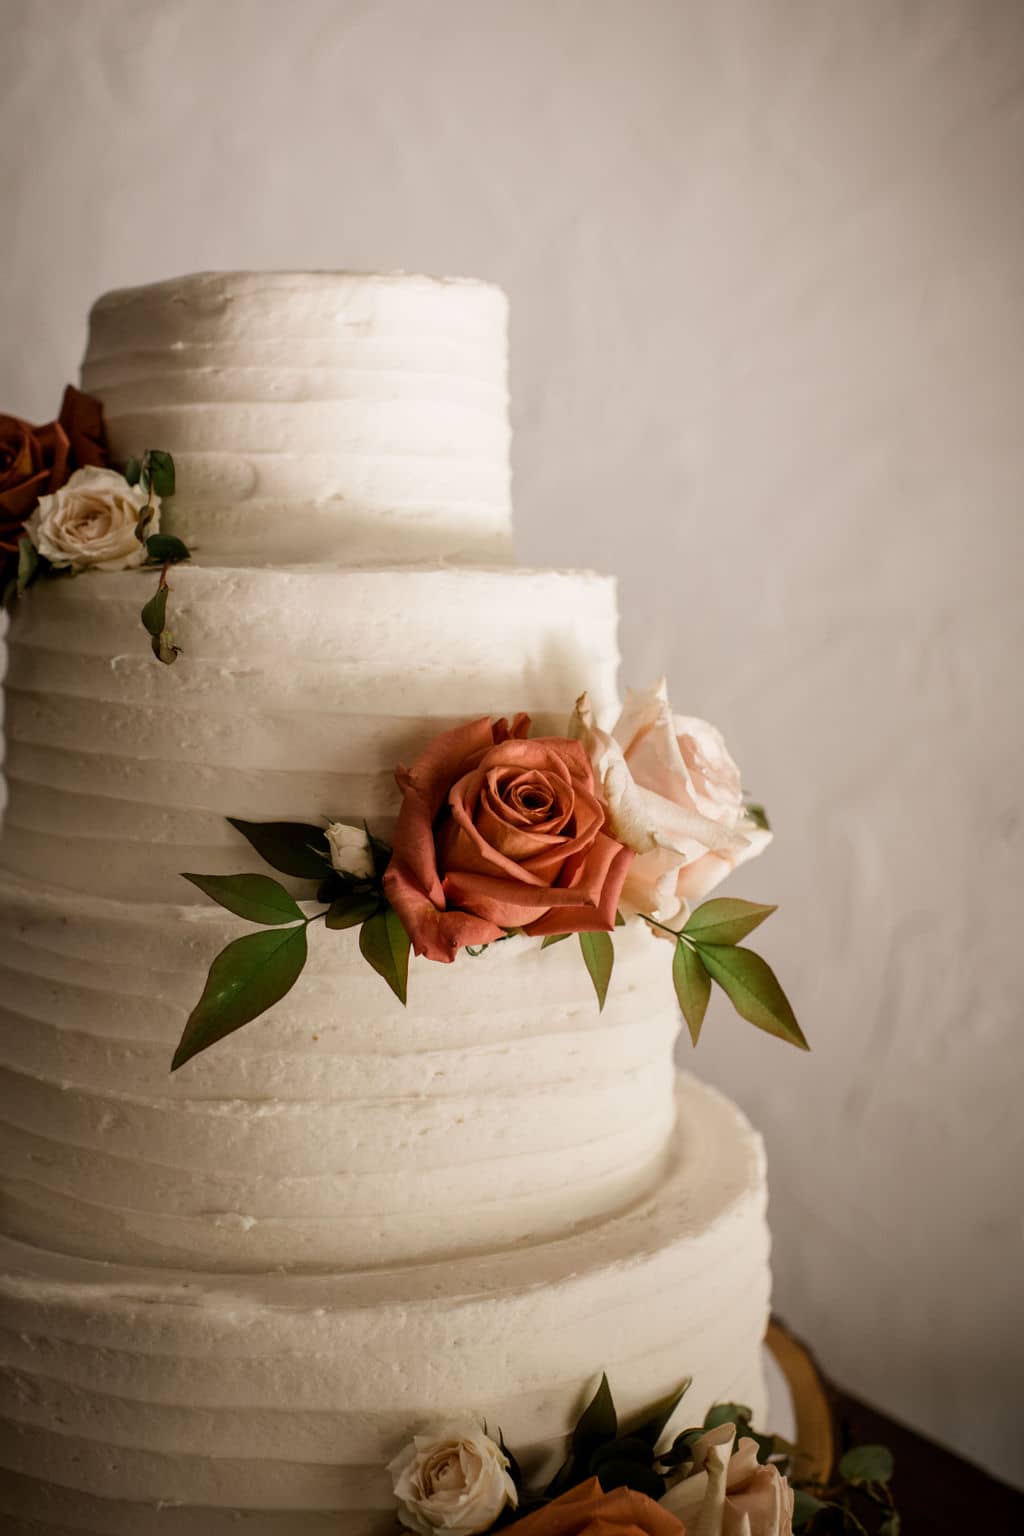 in learning how to plan a wedding in bryan college station, the bride and groom opted for a four tier cake form a local vendor